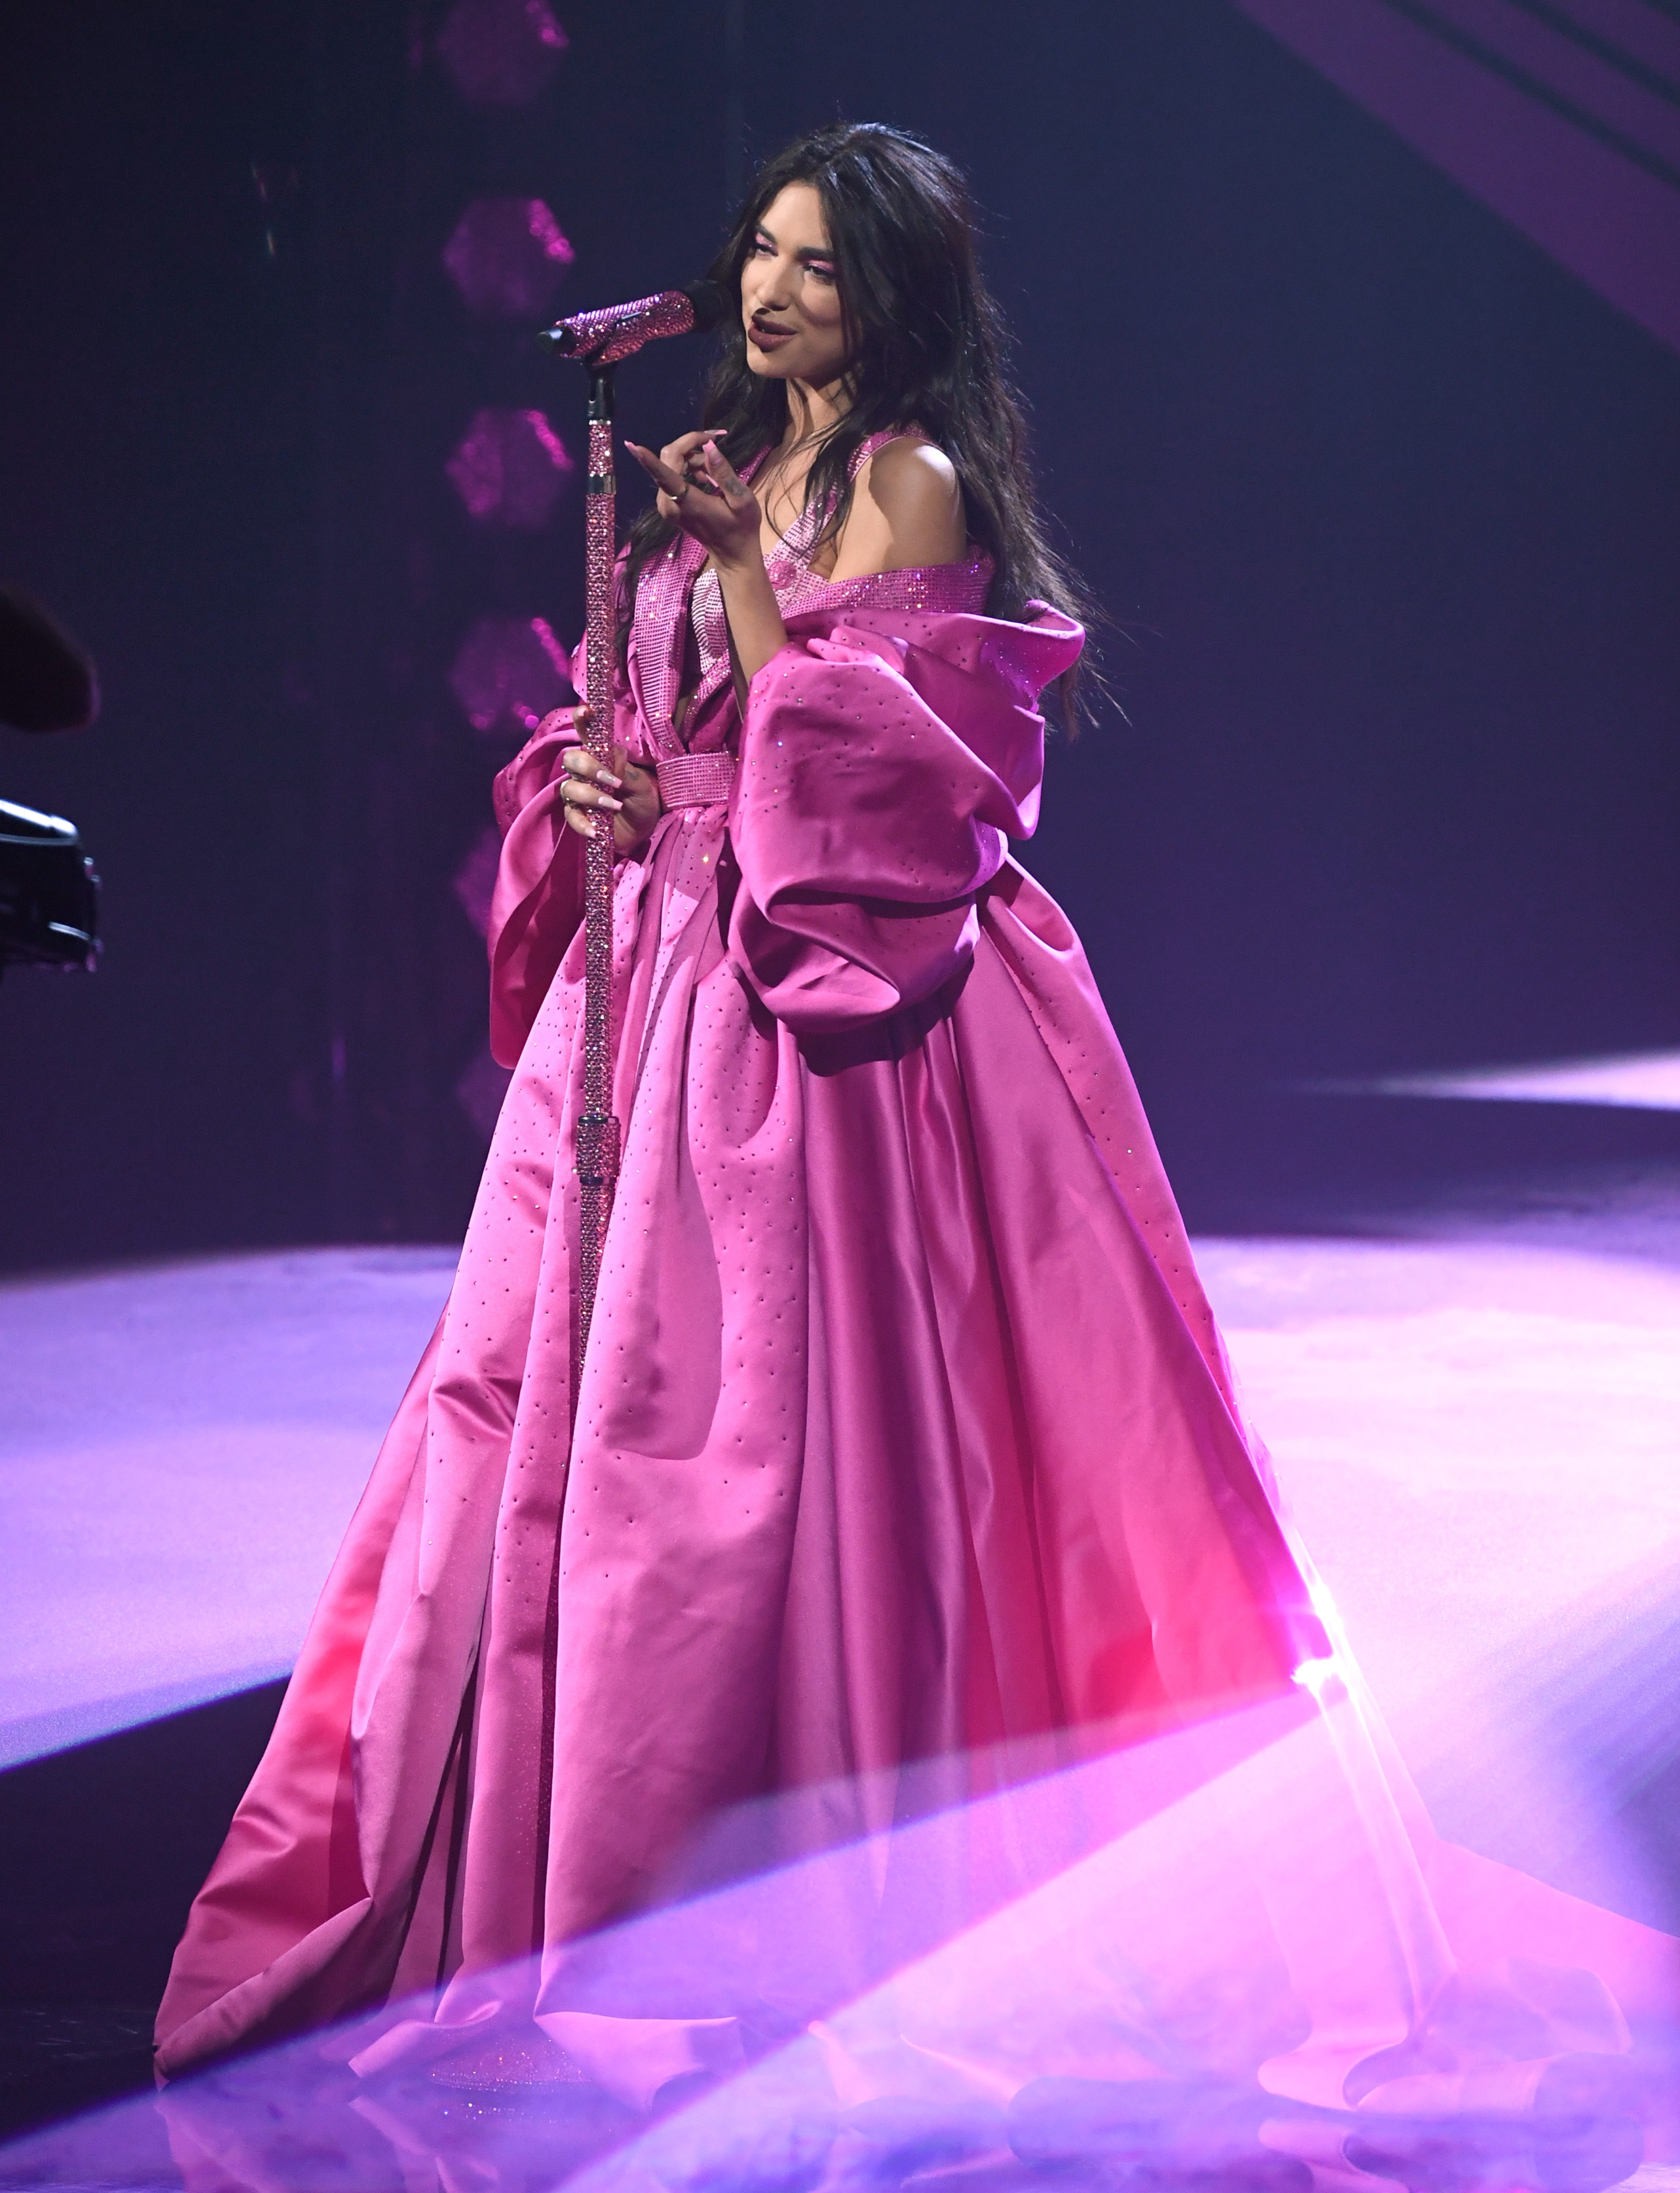 LOS ANGELES, CALIFORNIA: In this image released on March 14, Dua Lipa performs onstage during the 63rd Annual GRAMMY Awards at Los Angeles Convention Center in Los Angeles, California and broadcast on March 14, 2021. (Photo by Kevin Winter/Getty Images fo (Foto: Getty Images for The Recording A)